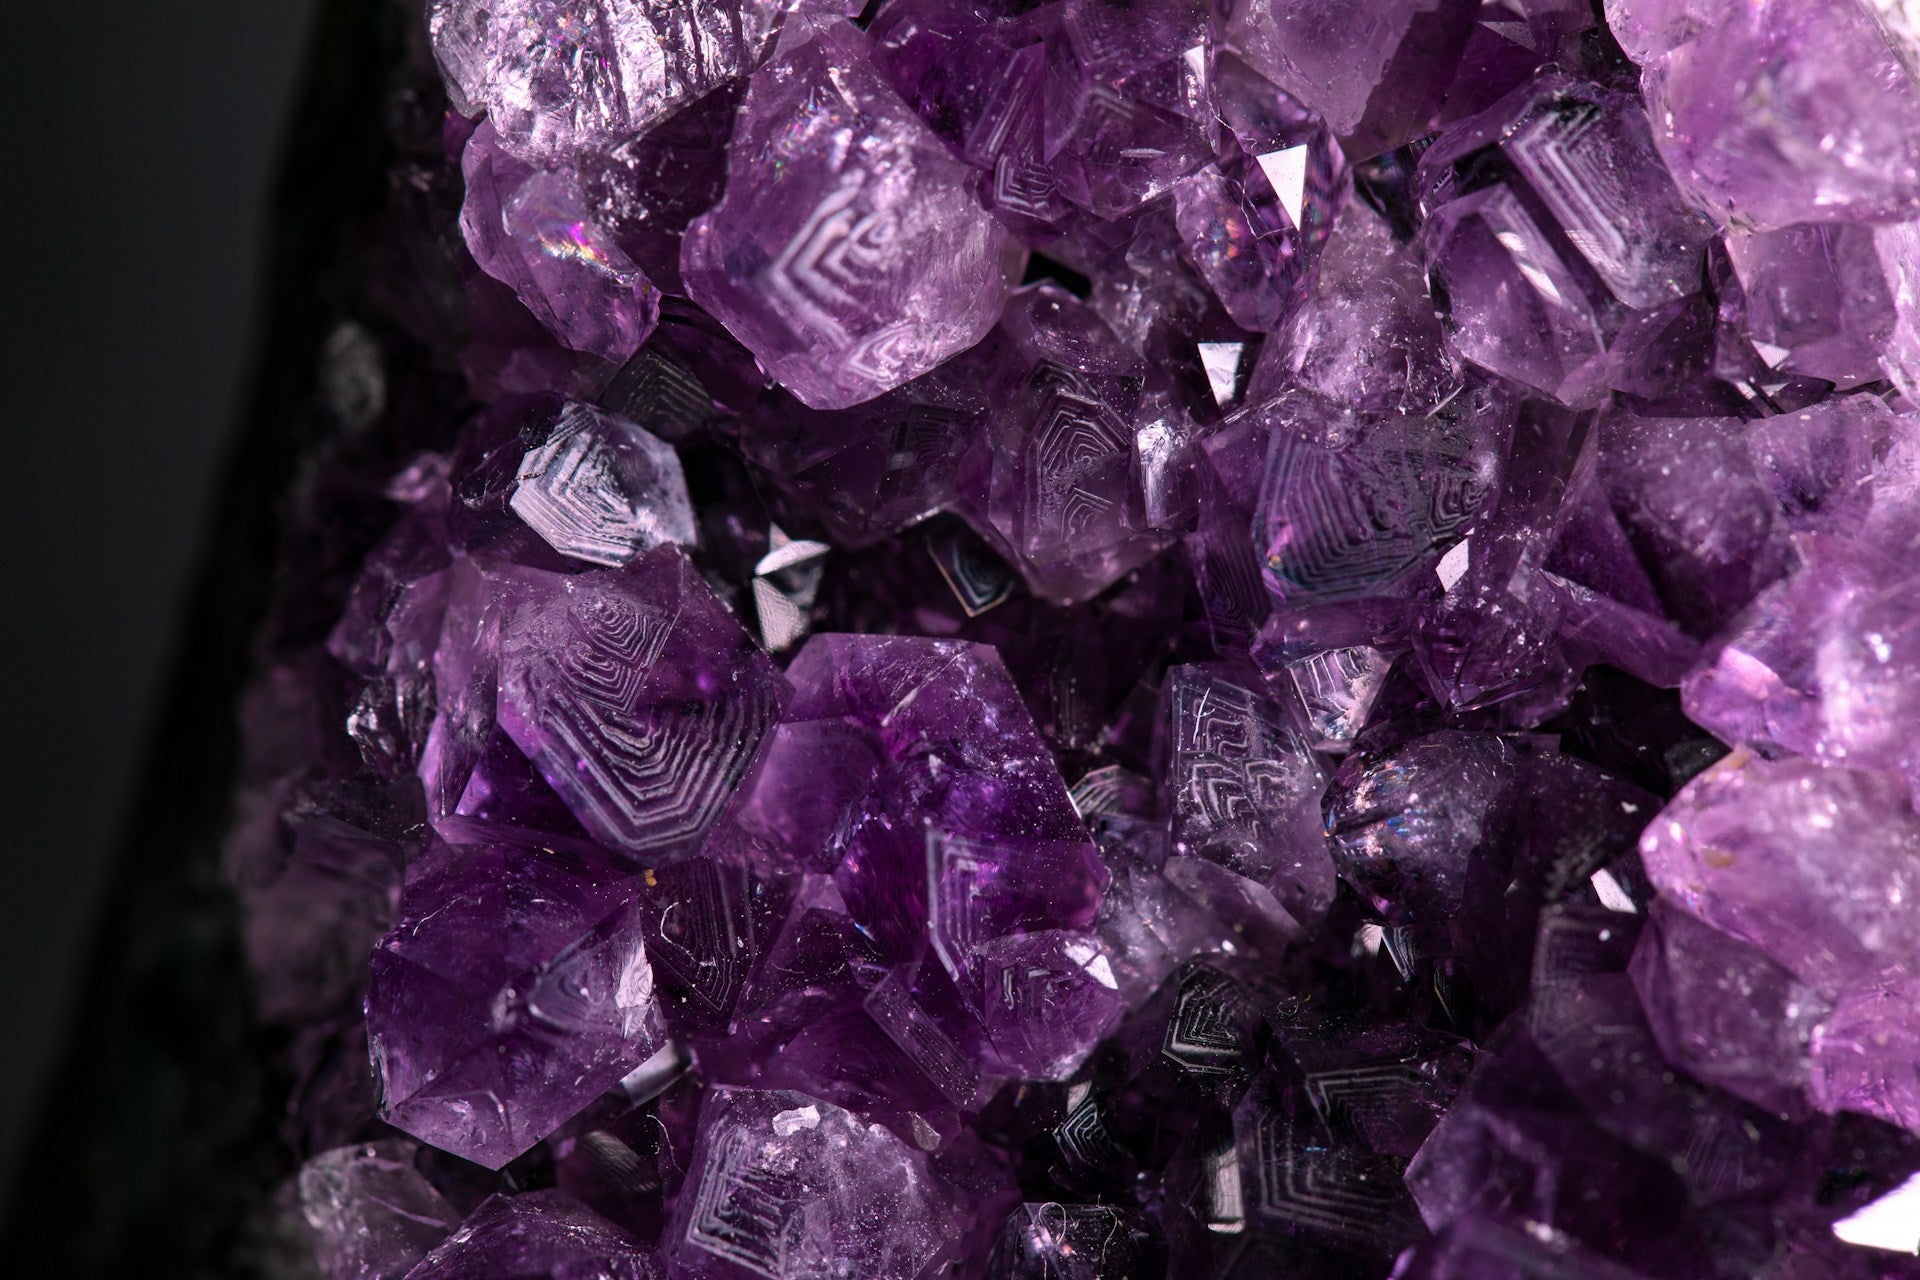 A close-up of an amethyst crystal